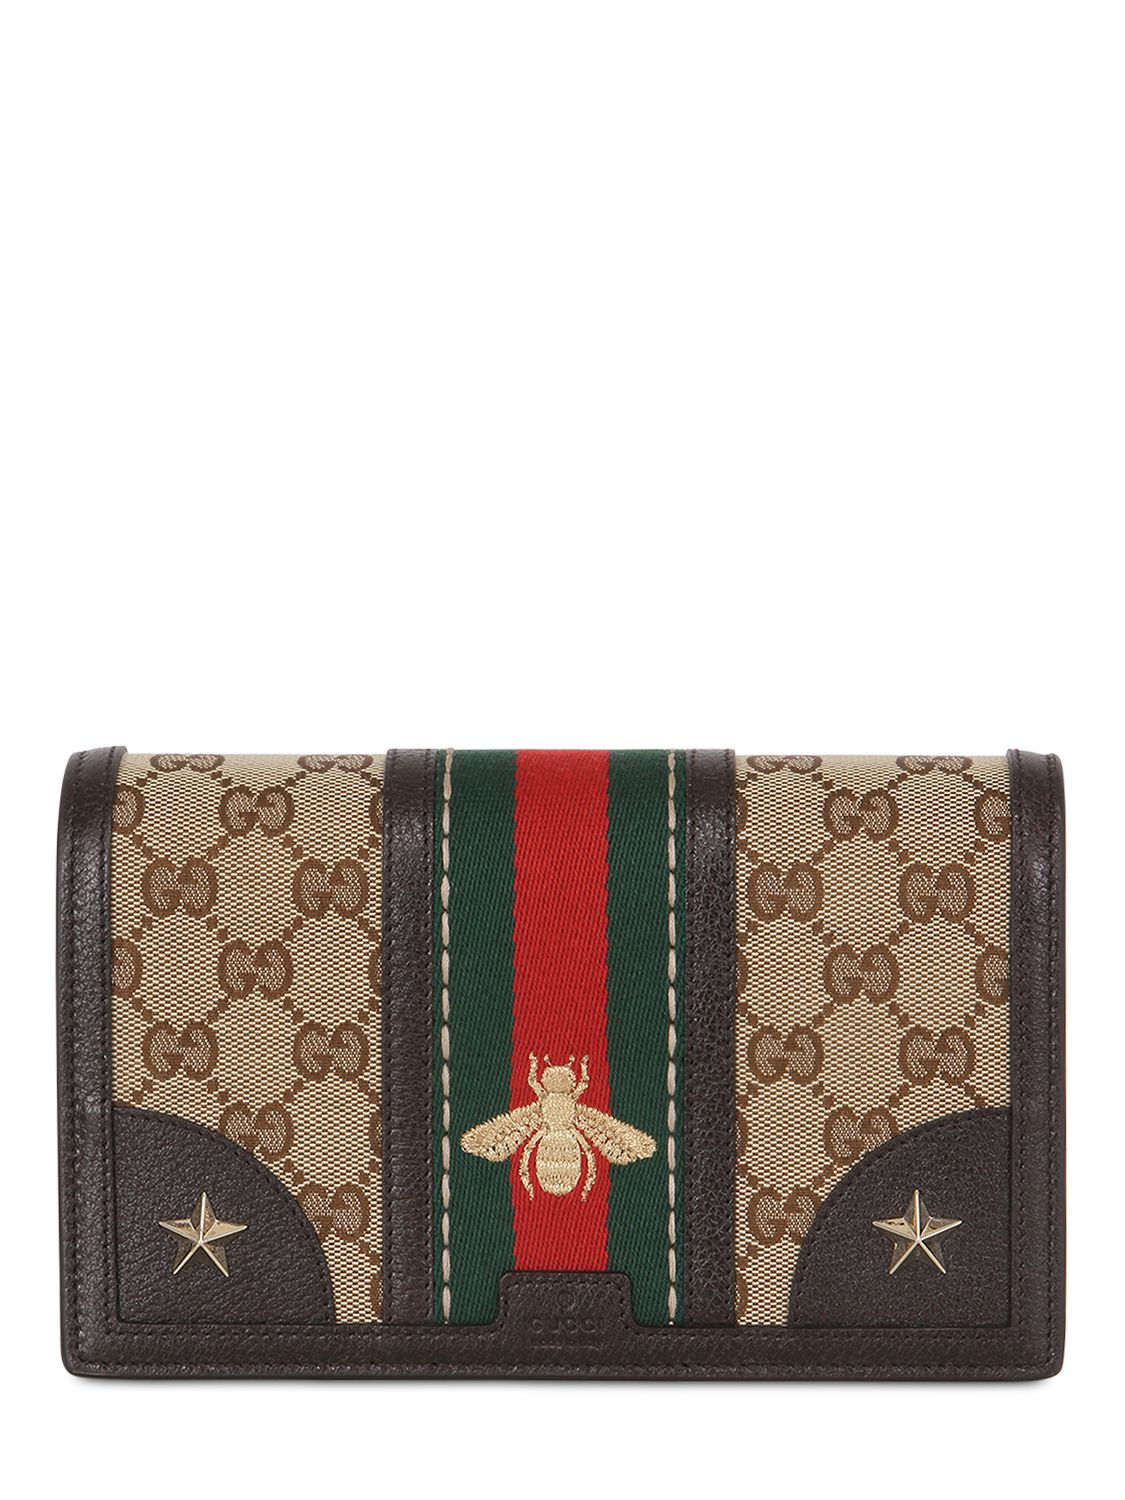 Gucci GG Supreme Bee-Embroidered Canvas Bag in Brown | Lyst